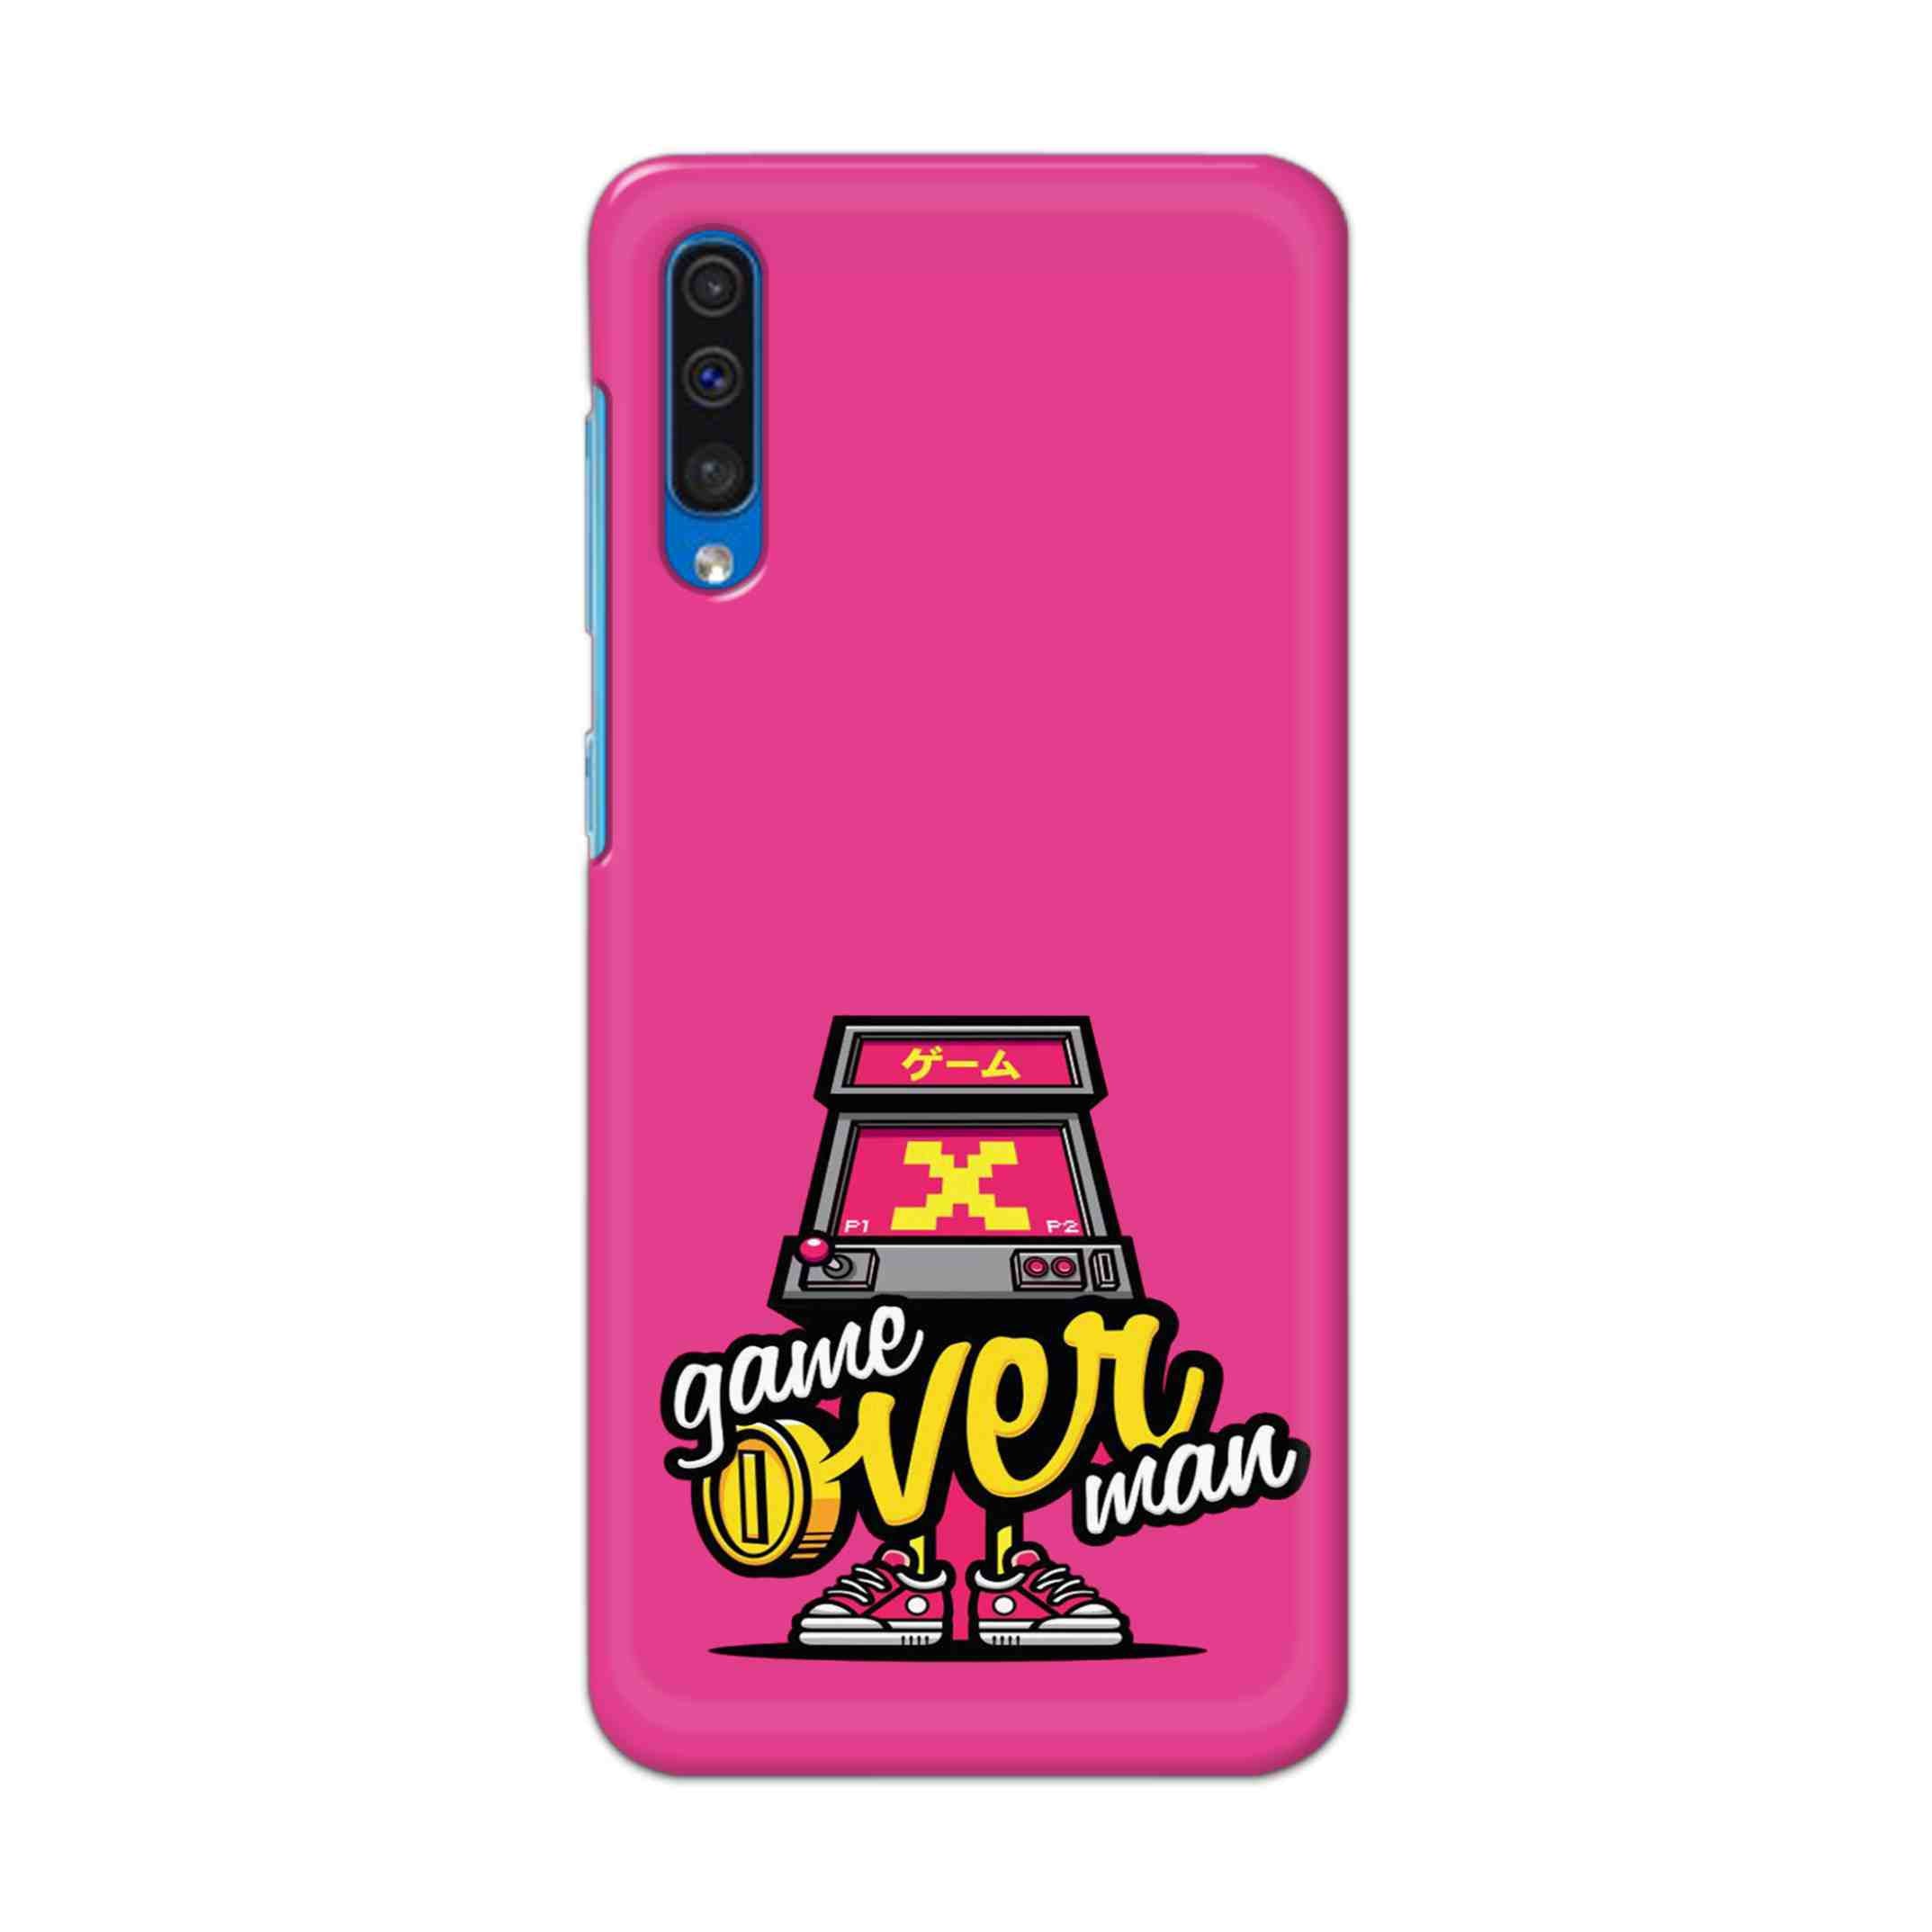 Buy Game Over Man Hard Back Mobile Phone Case Cover For Samsung Galaxy A50 / A50s / A30s Online